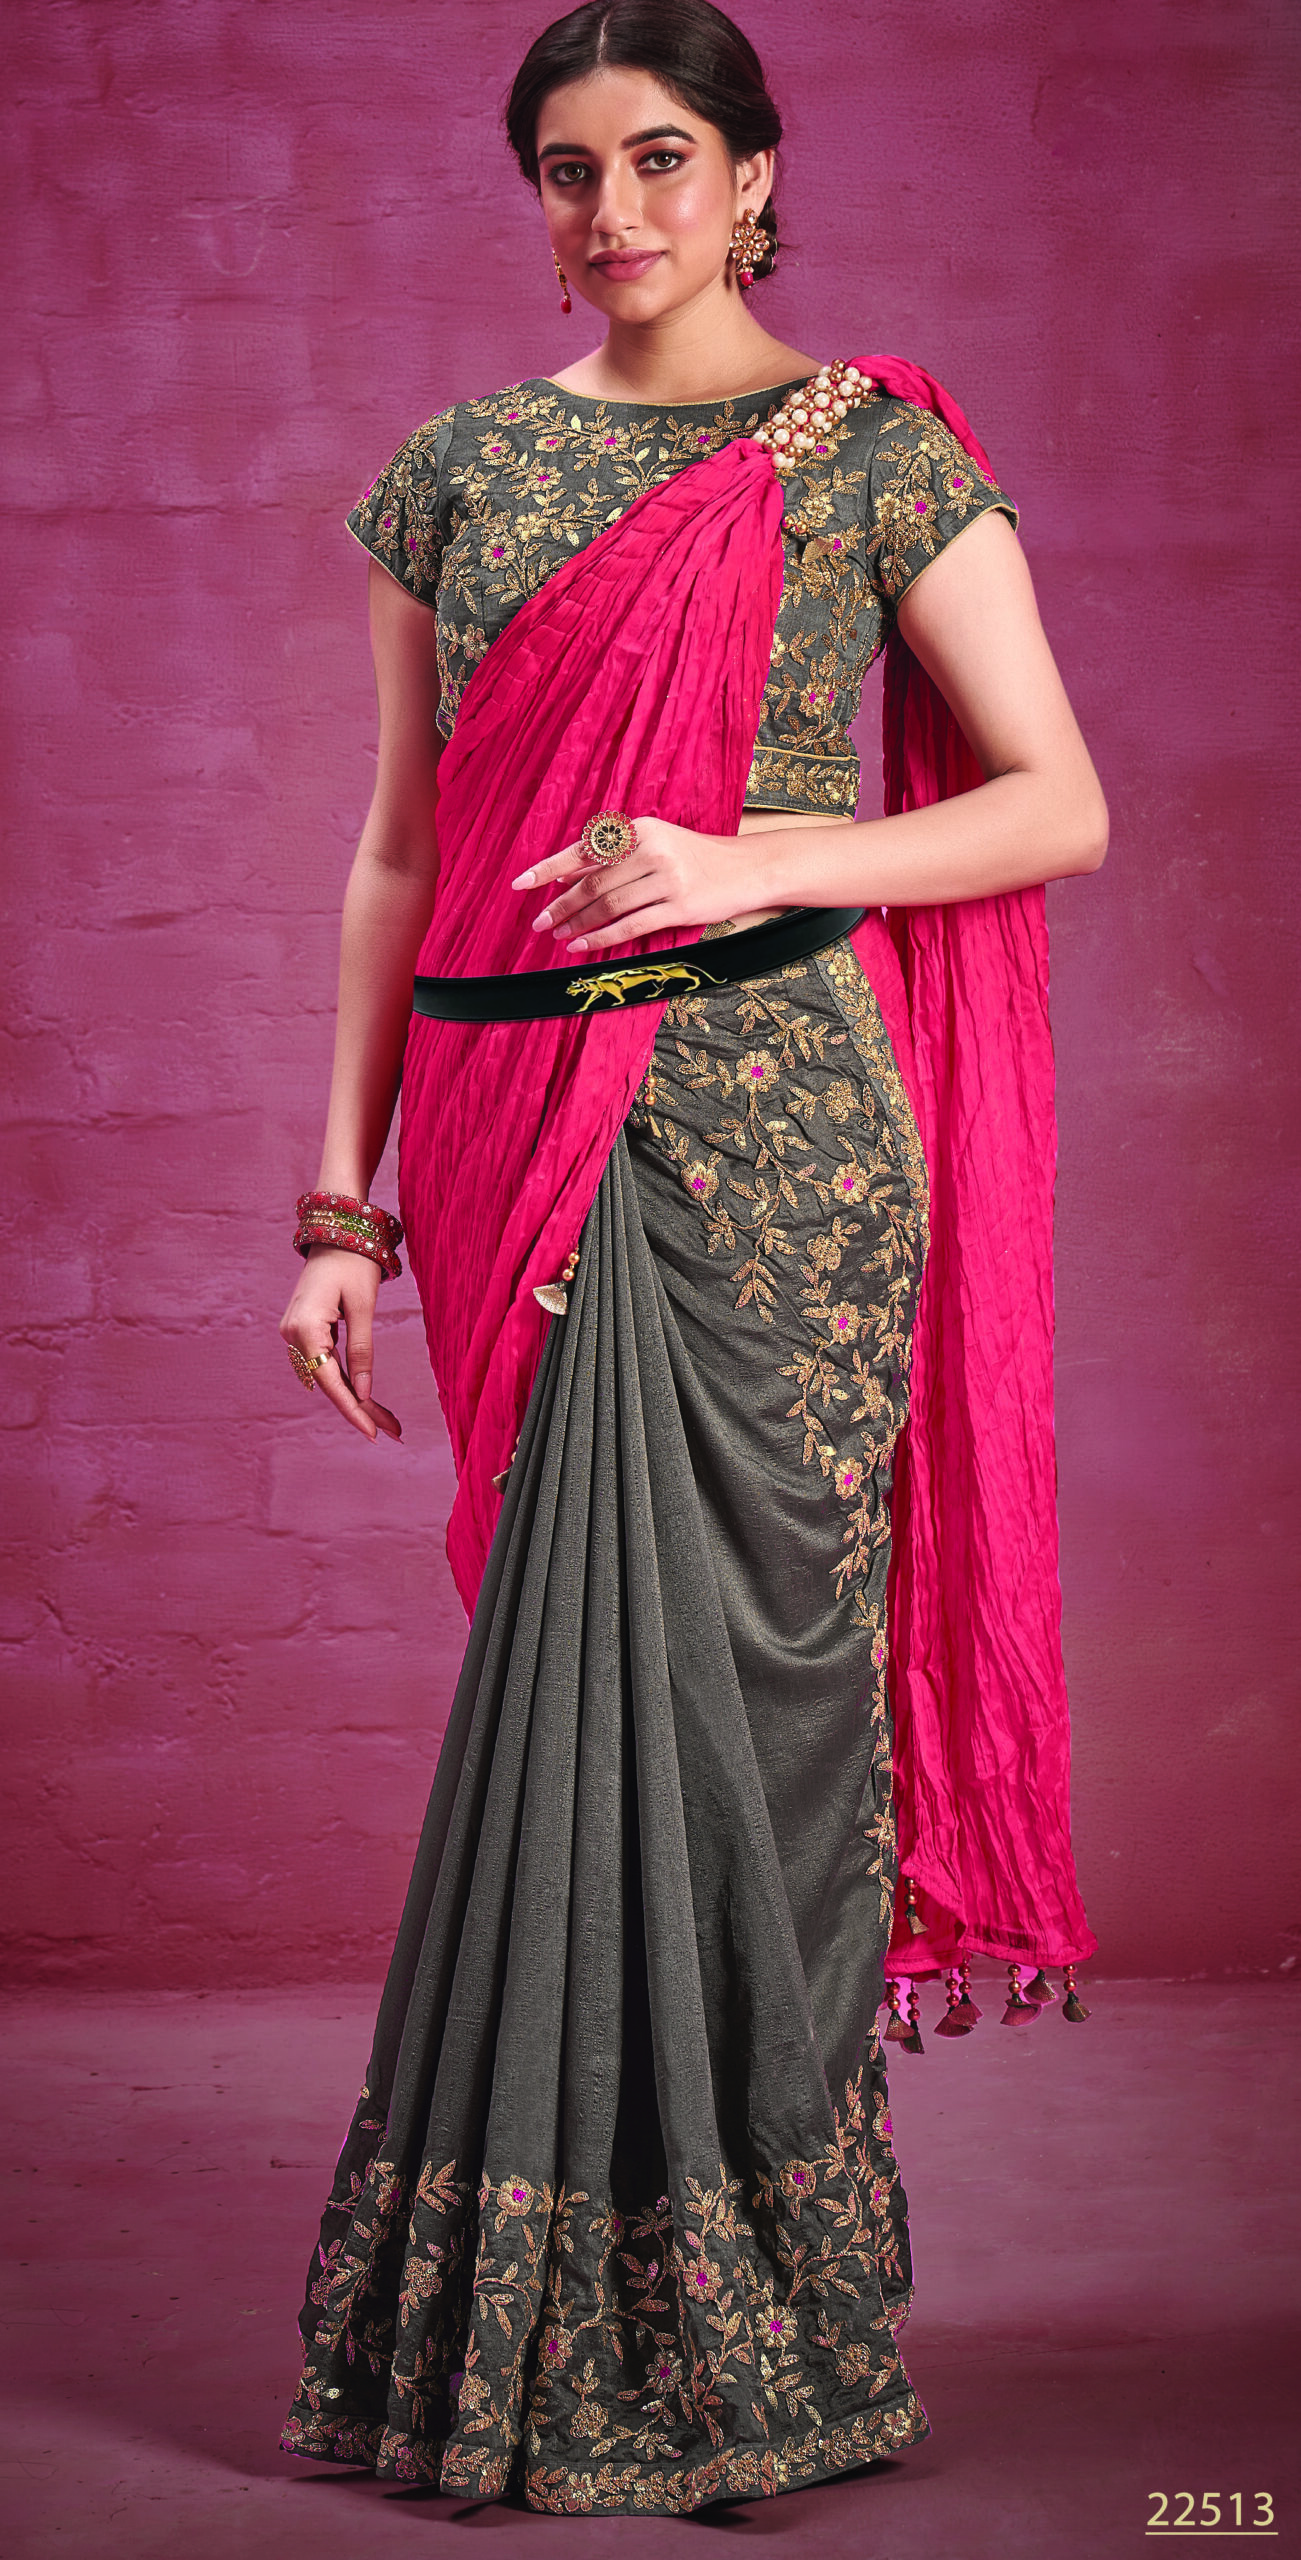 Hot Saree Party Wear Modern Saree Style for Party